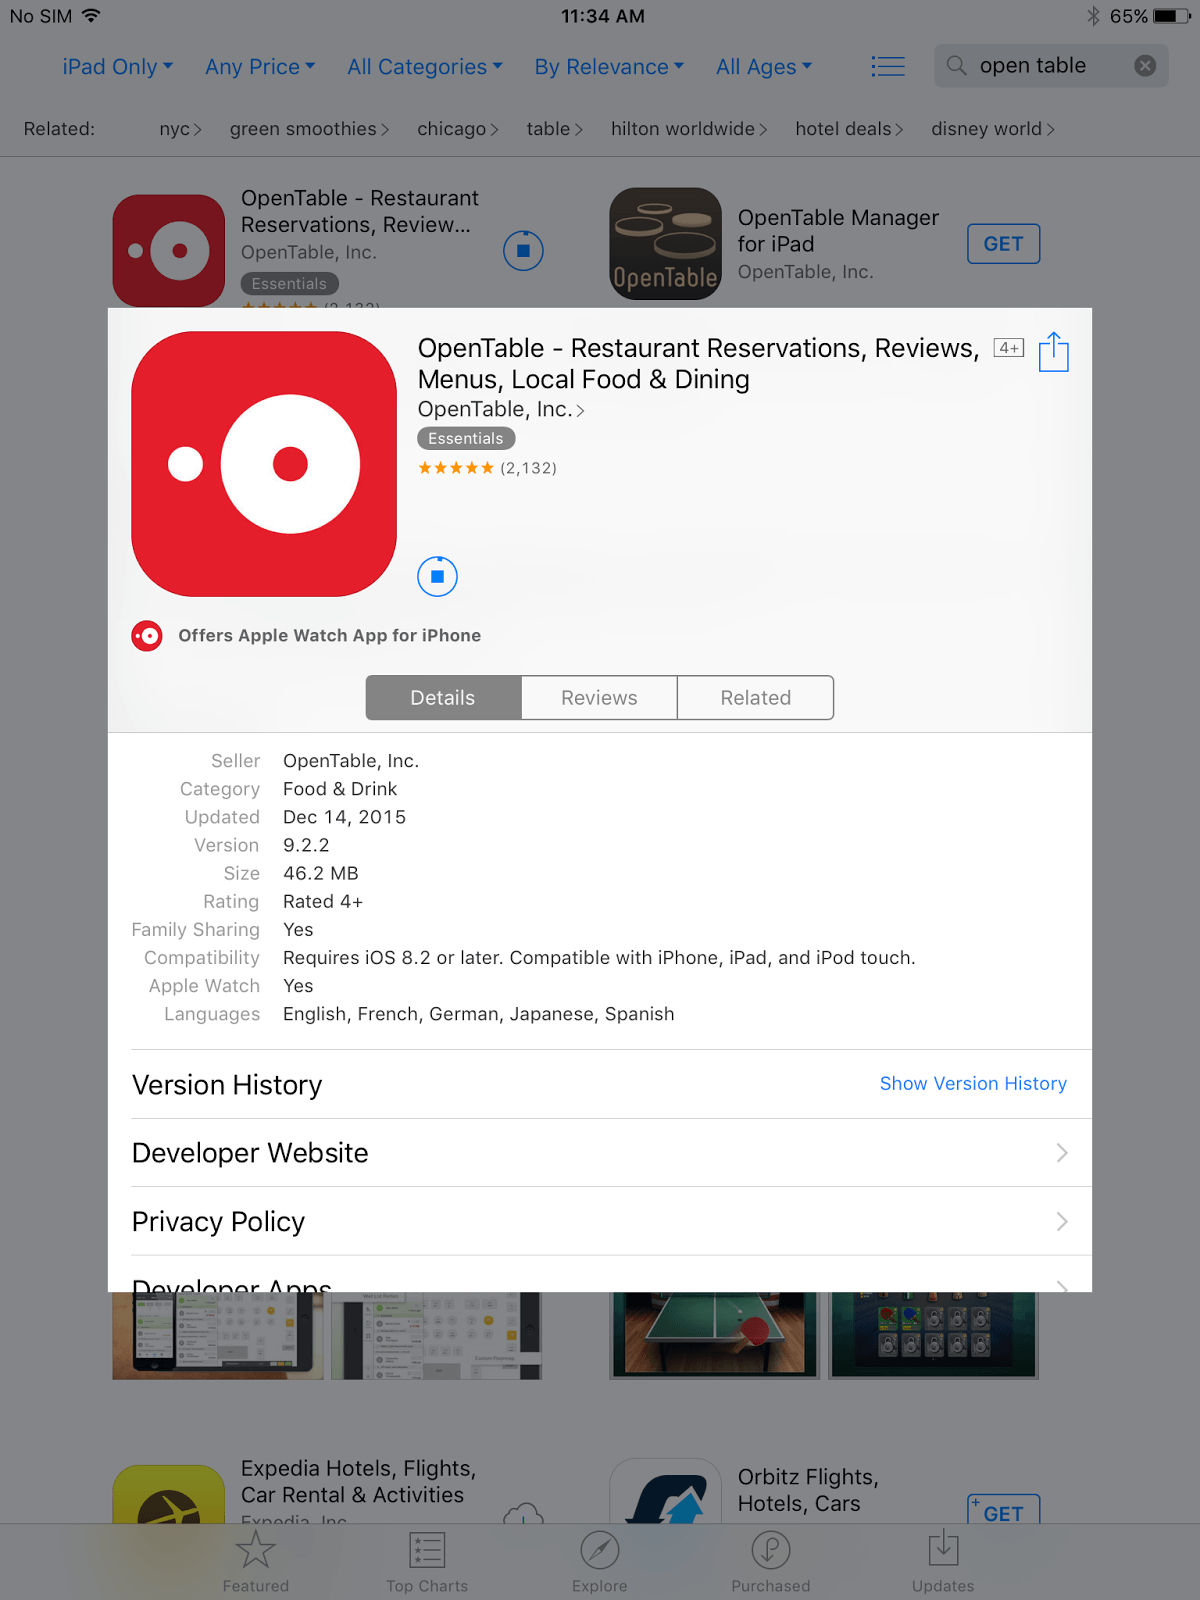 OpenTable App Logo - Random iPad complaints that no one will ever read: OpenTable